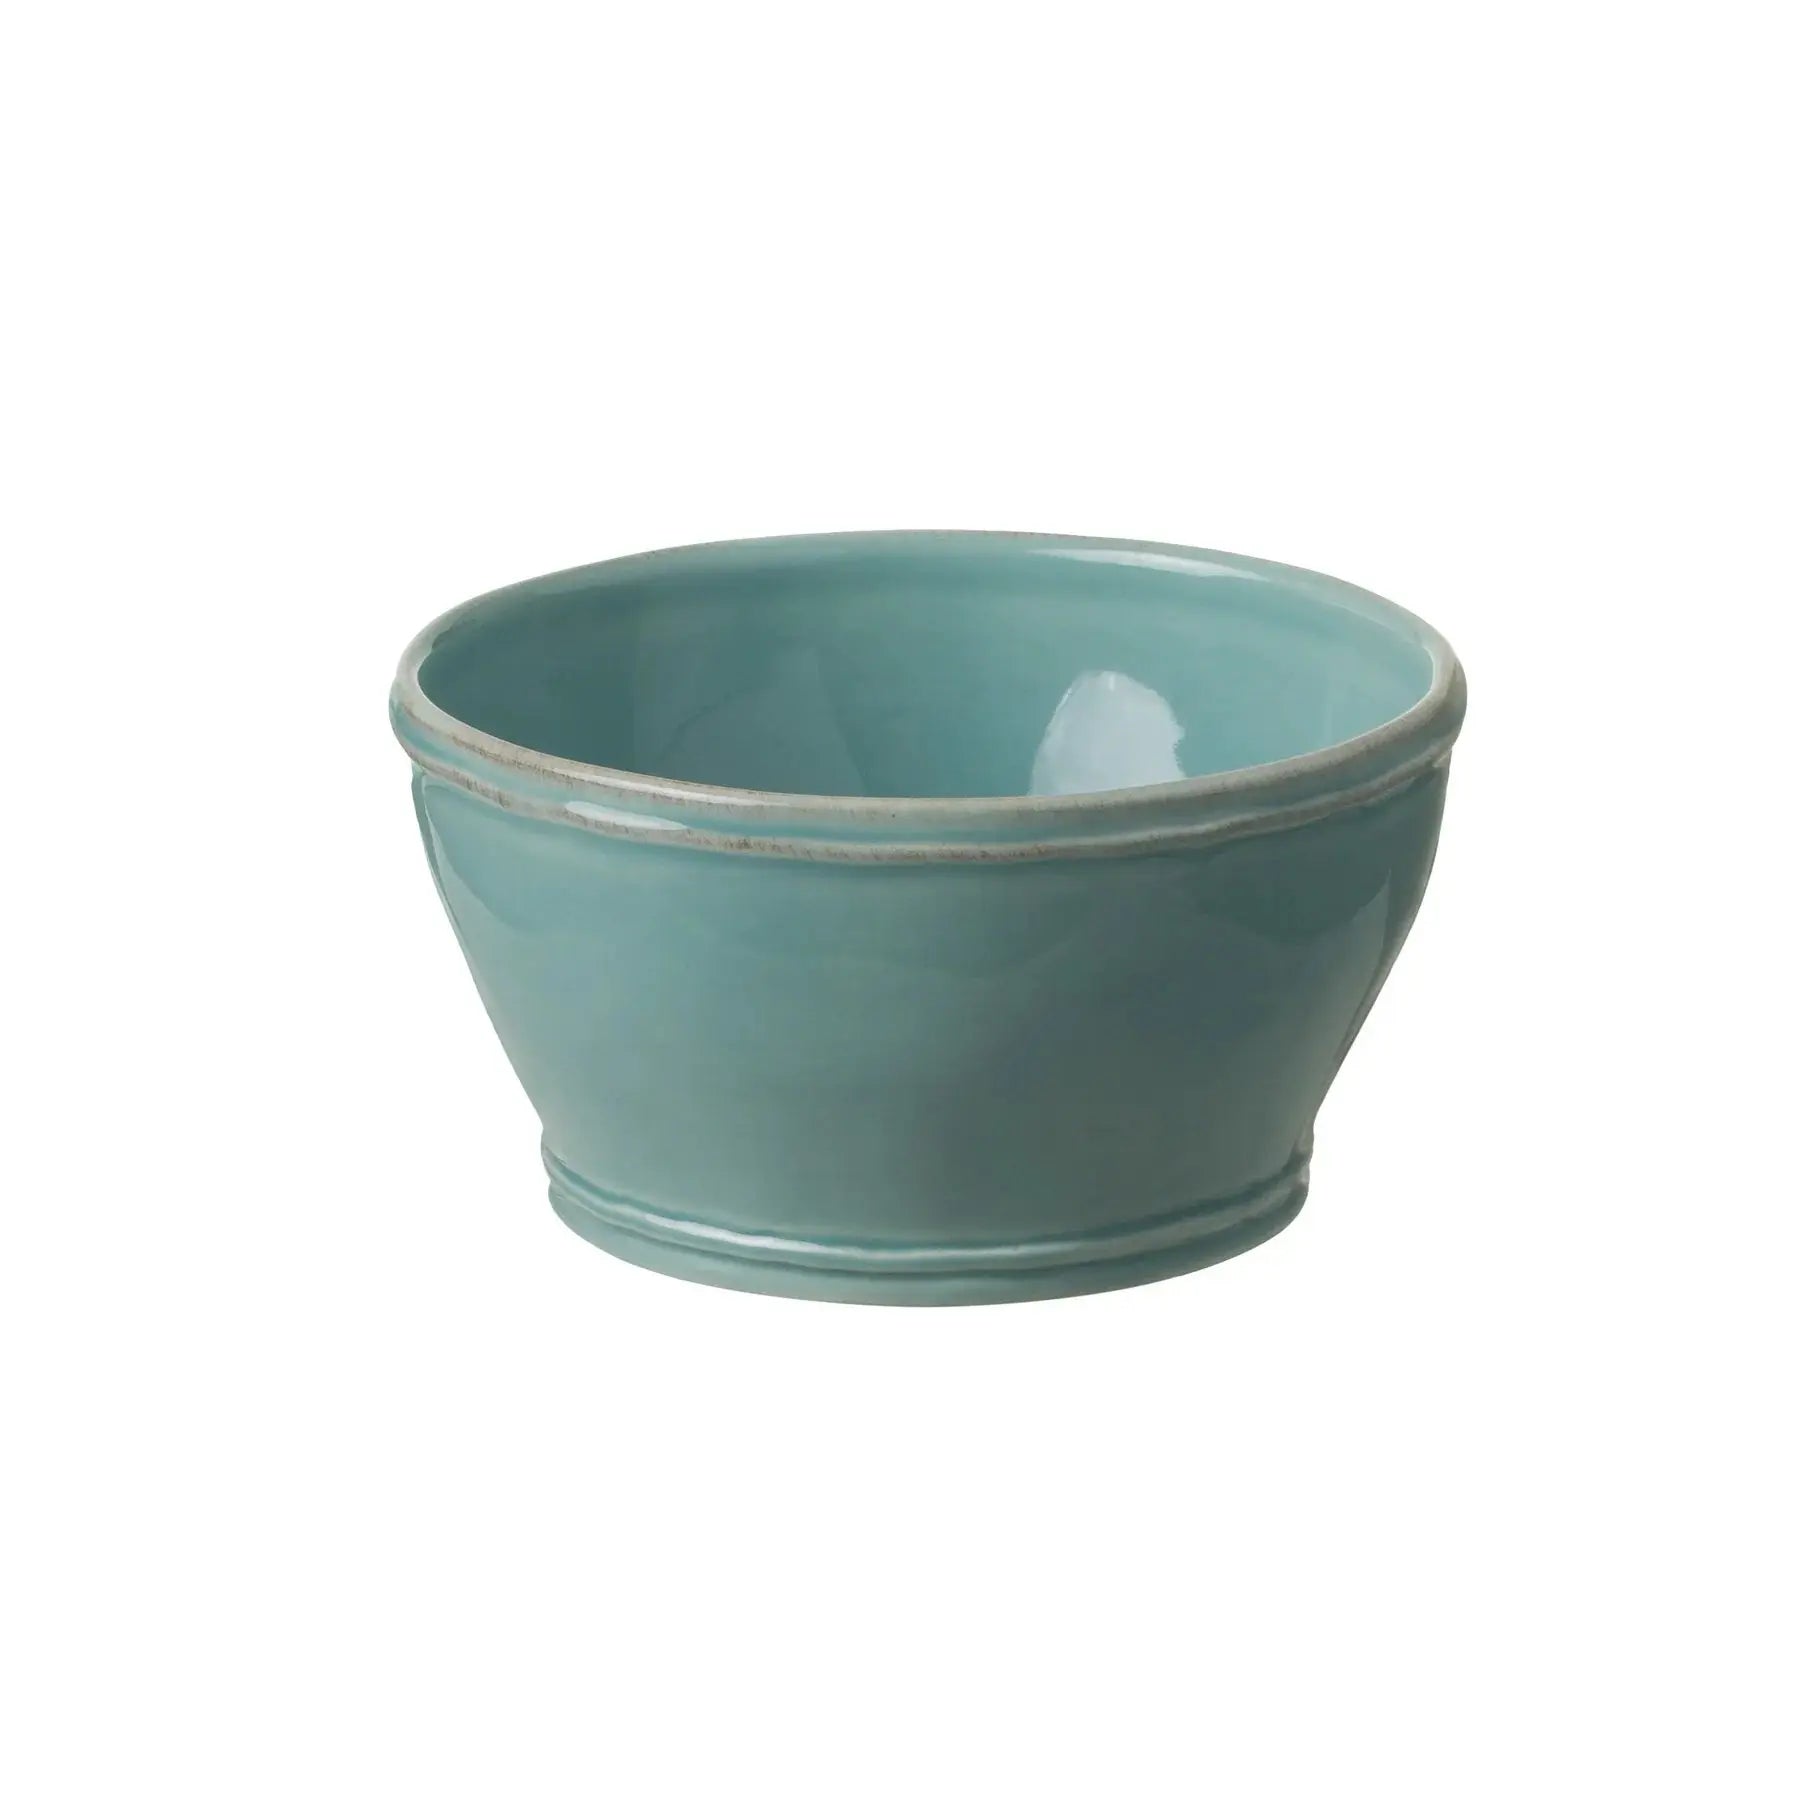 Casafina Fontana Soup Cereal Bowl in Turquoise